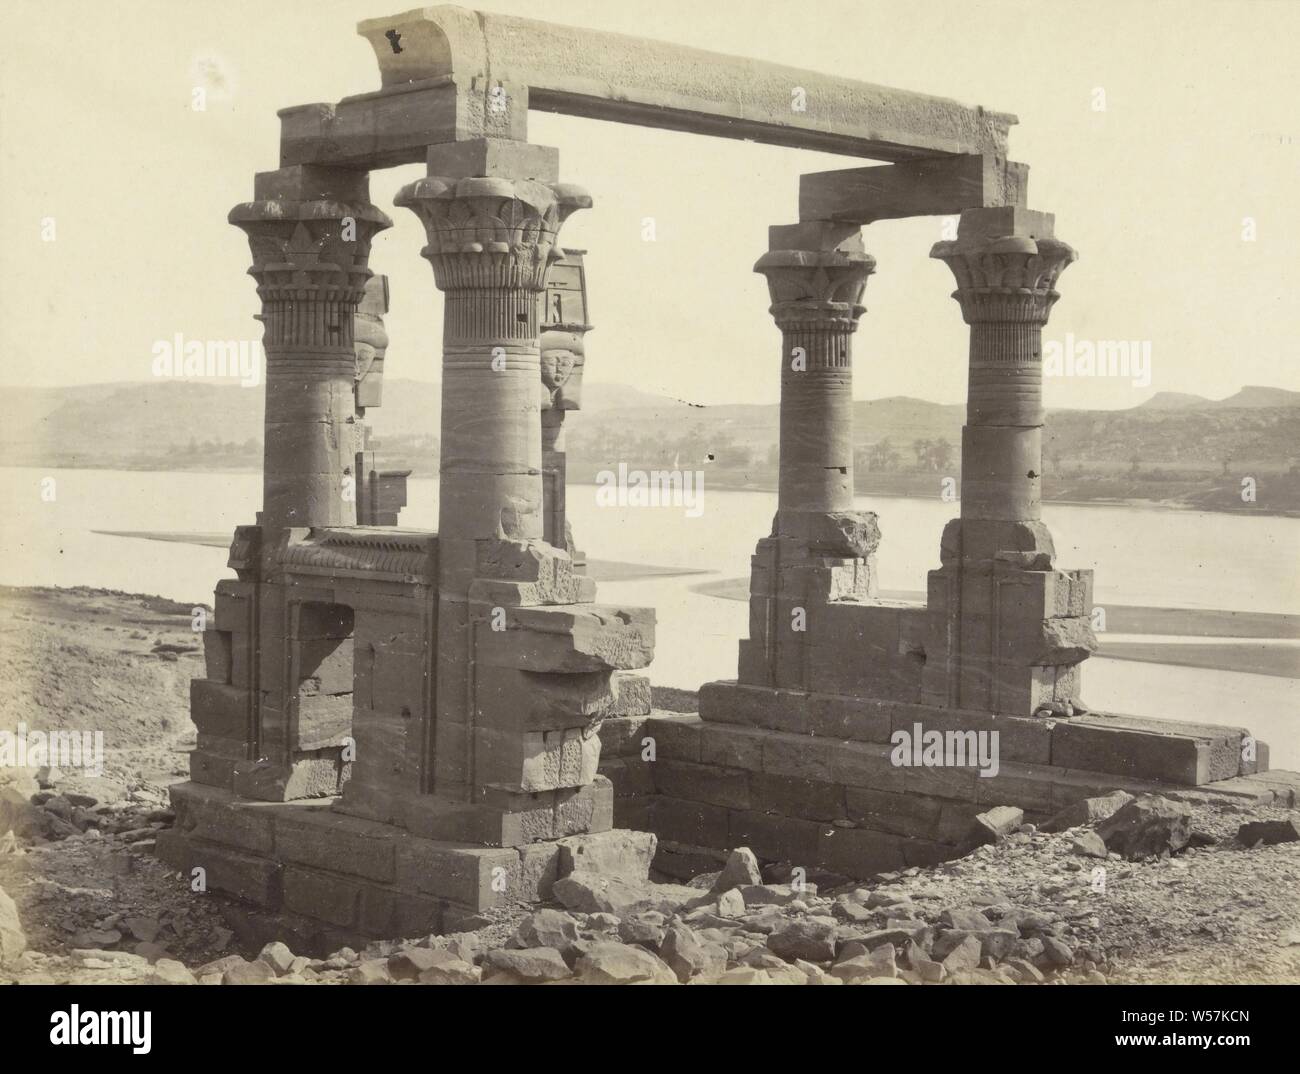 The temple of Wady Kardassy - Nubia, Luxor, Francis Frith, 1856 - 1859, albumen print Stock Photo